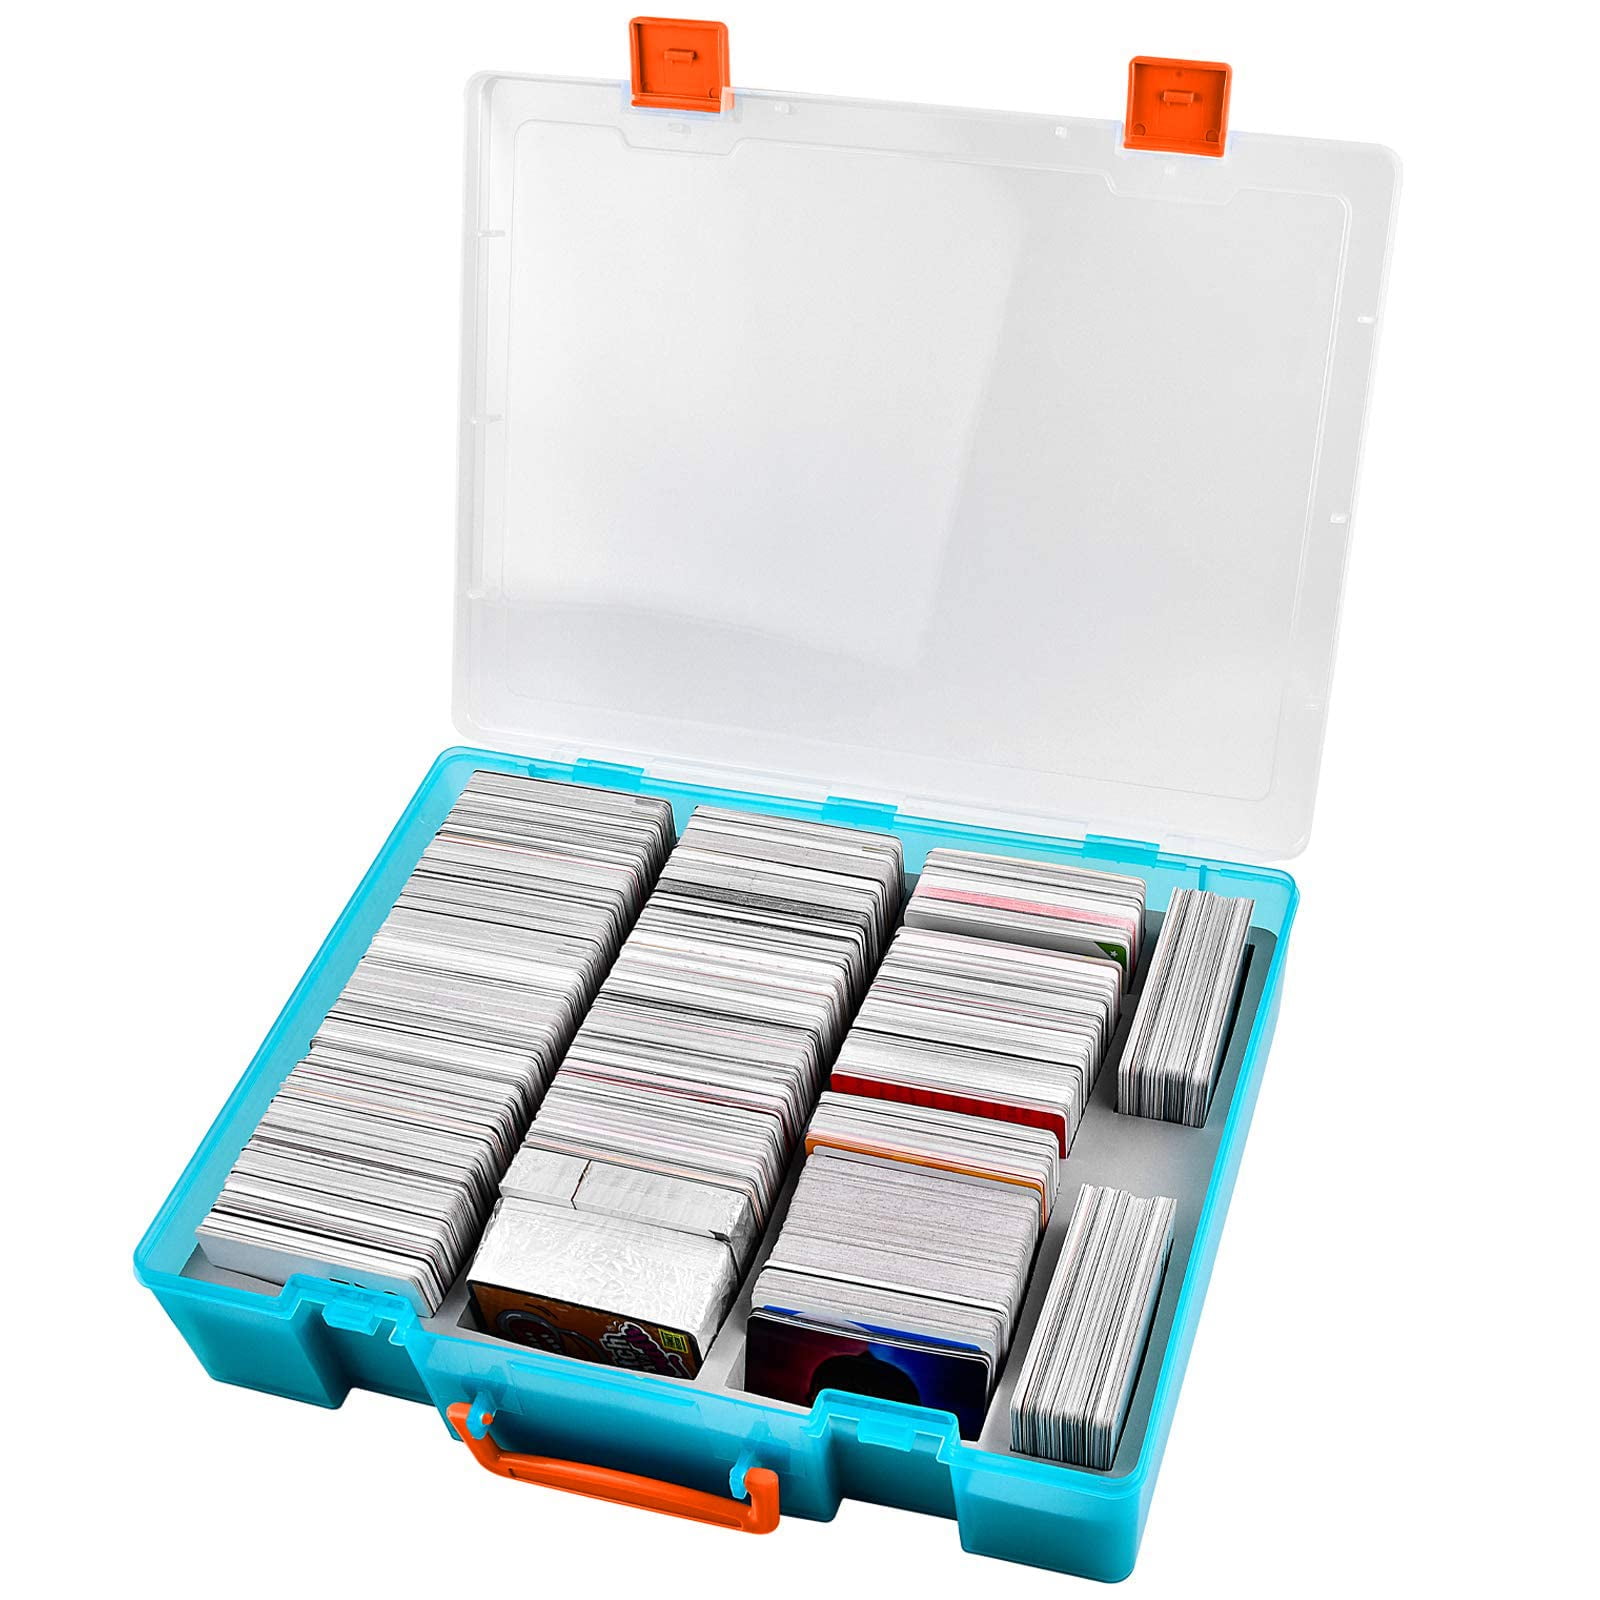 Trunab Card Game Storage Case For 3100 Unsleeved Cards New In Bag